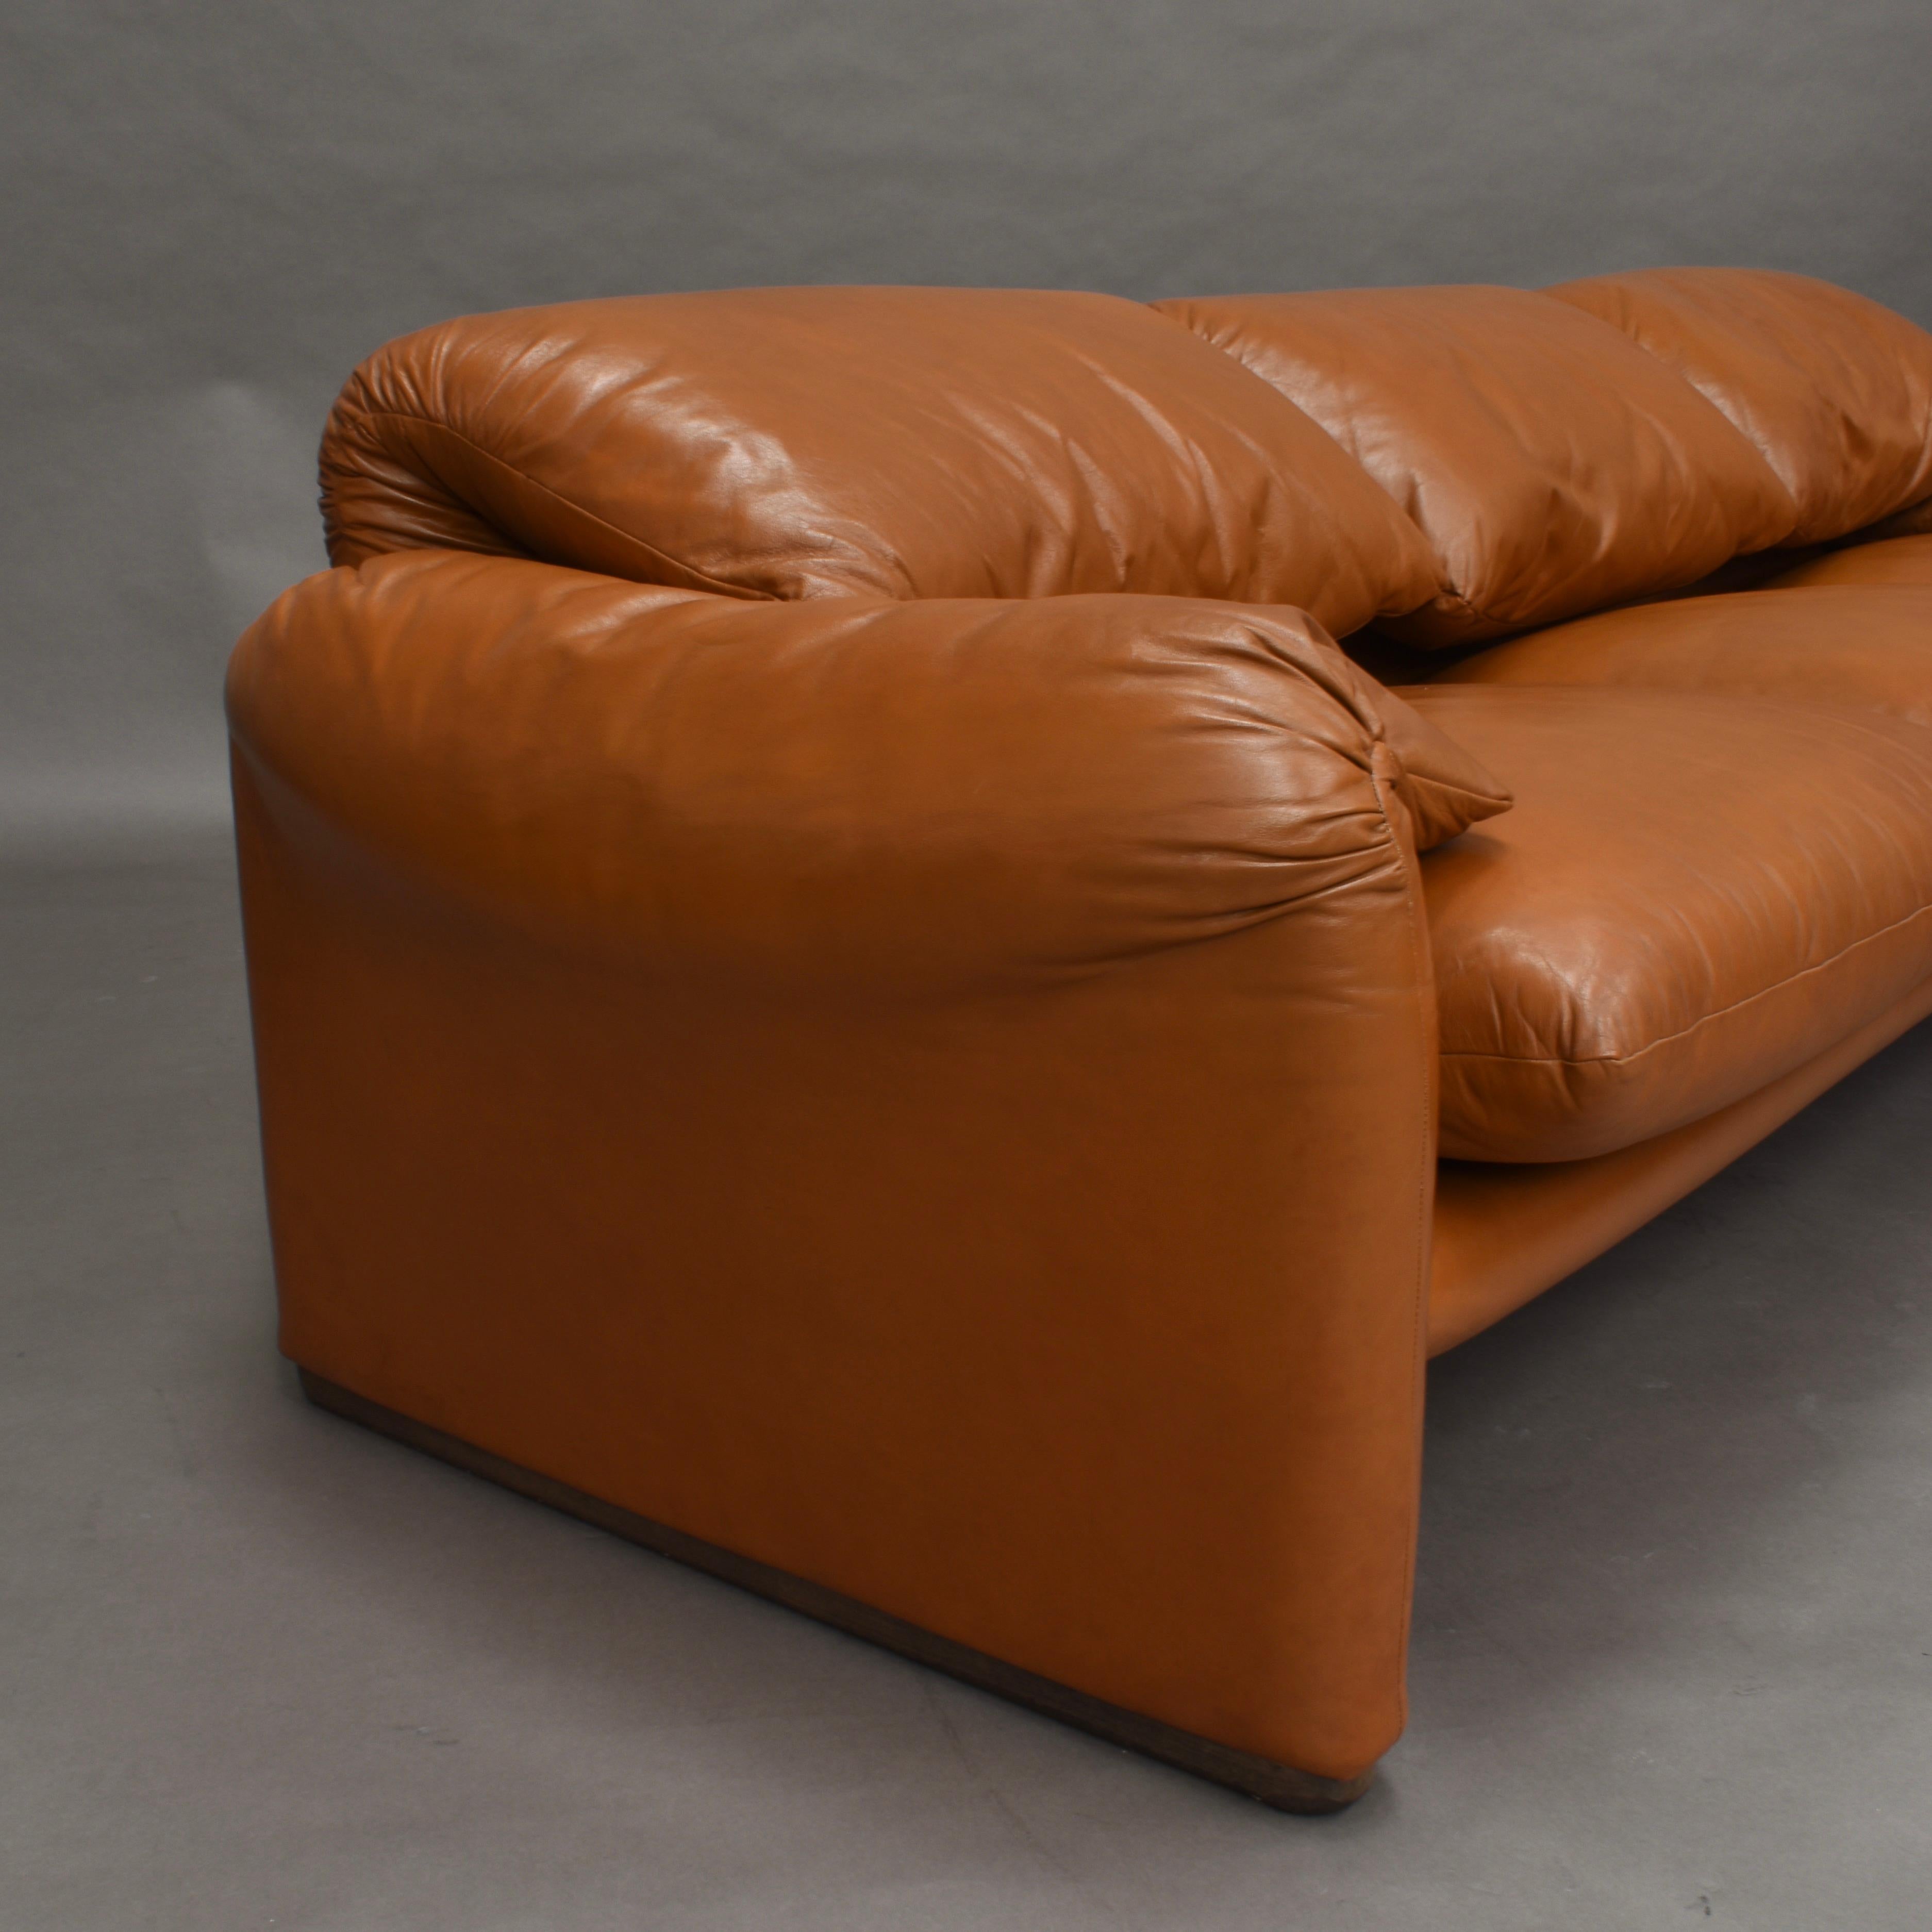 Early Maralunga Sofa in Tan Leather by Vico Magistretti for Cassina, Italy, 1973 In Good Condition In Pijnacker, Zuid-Holland